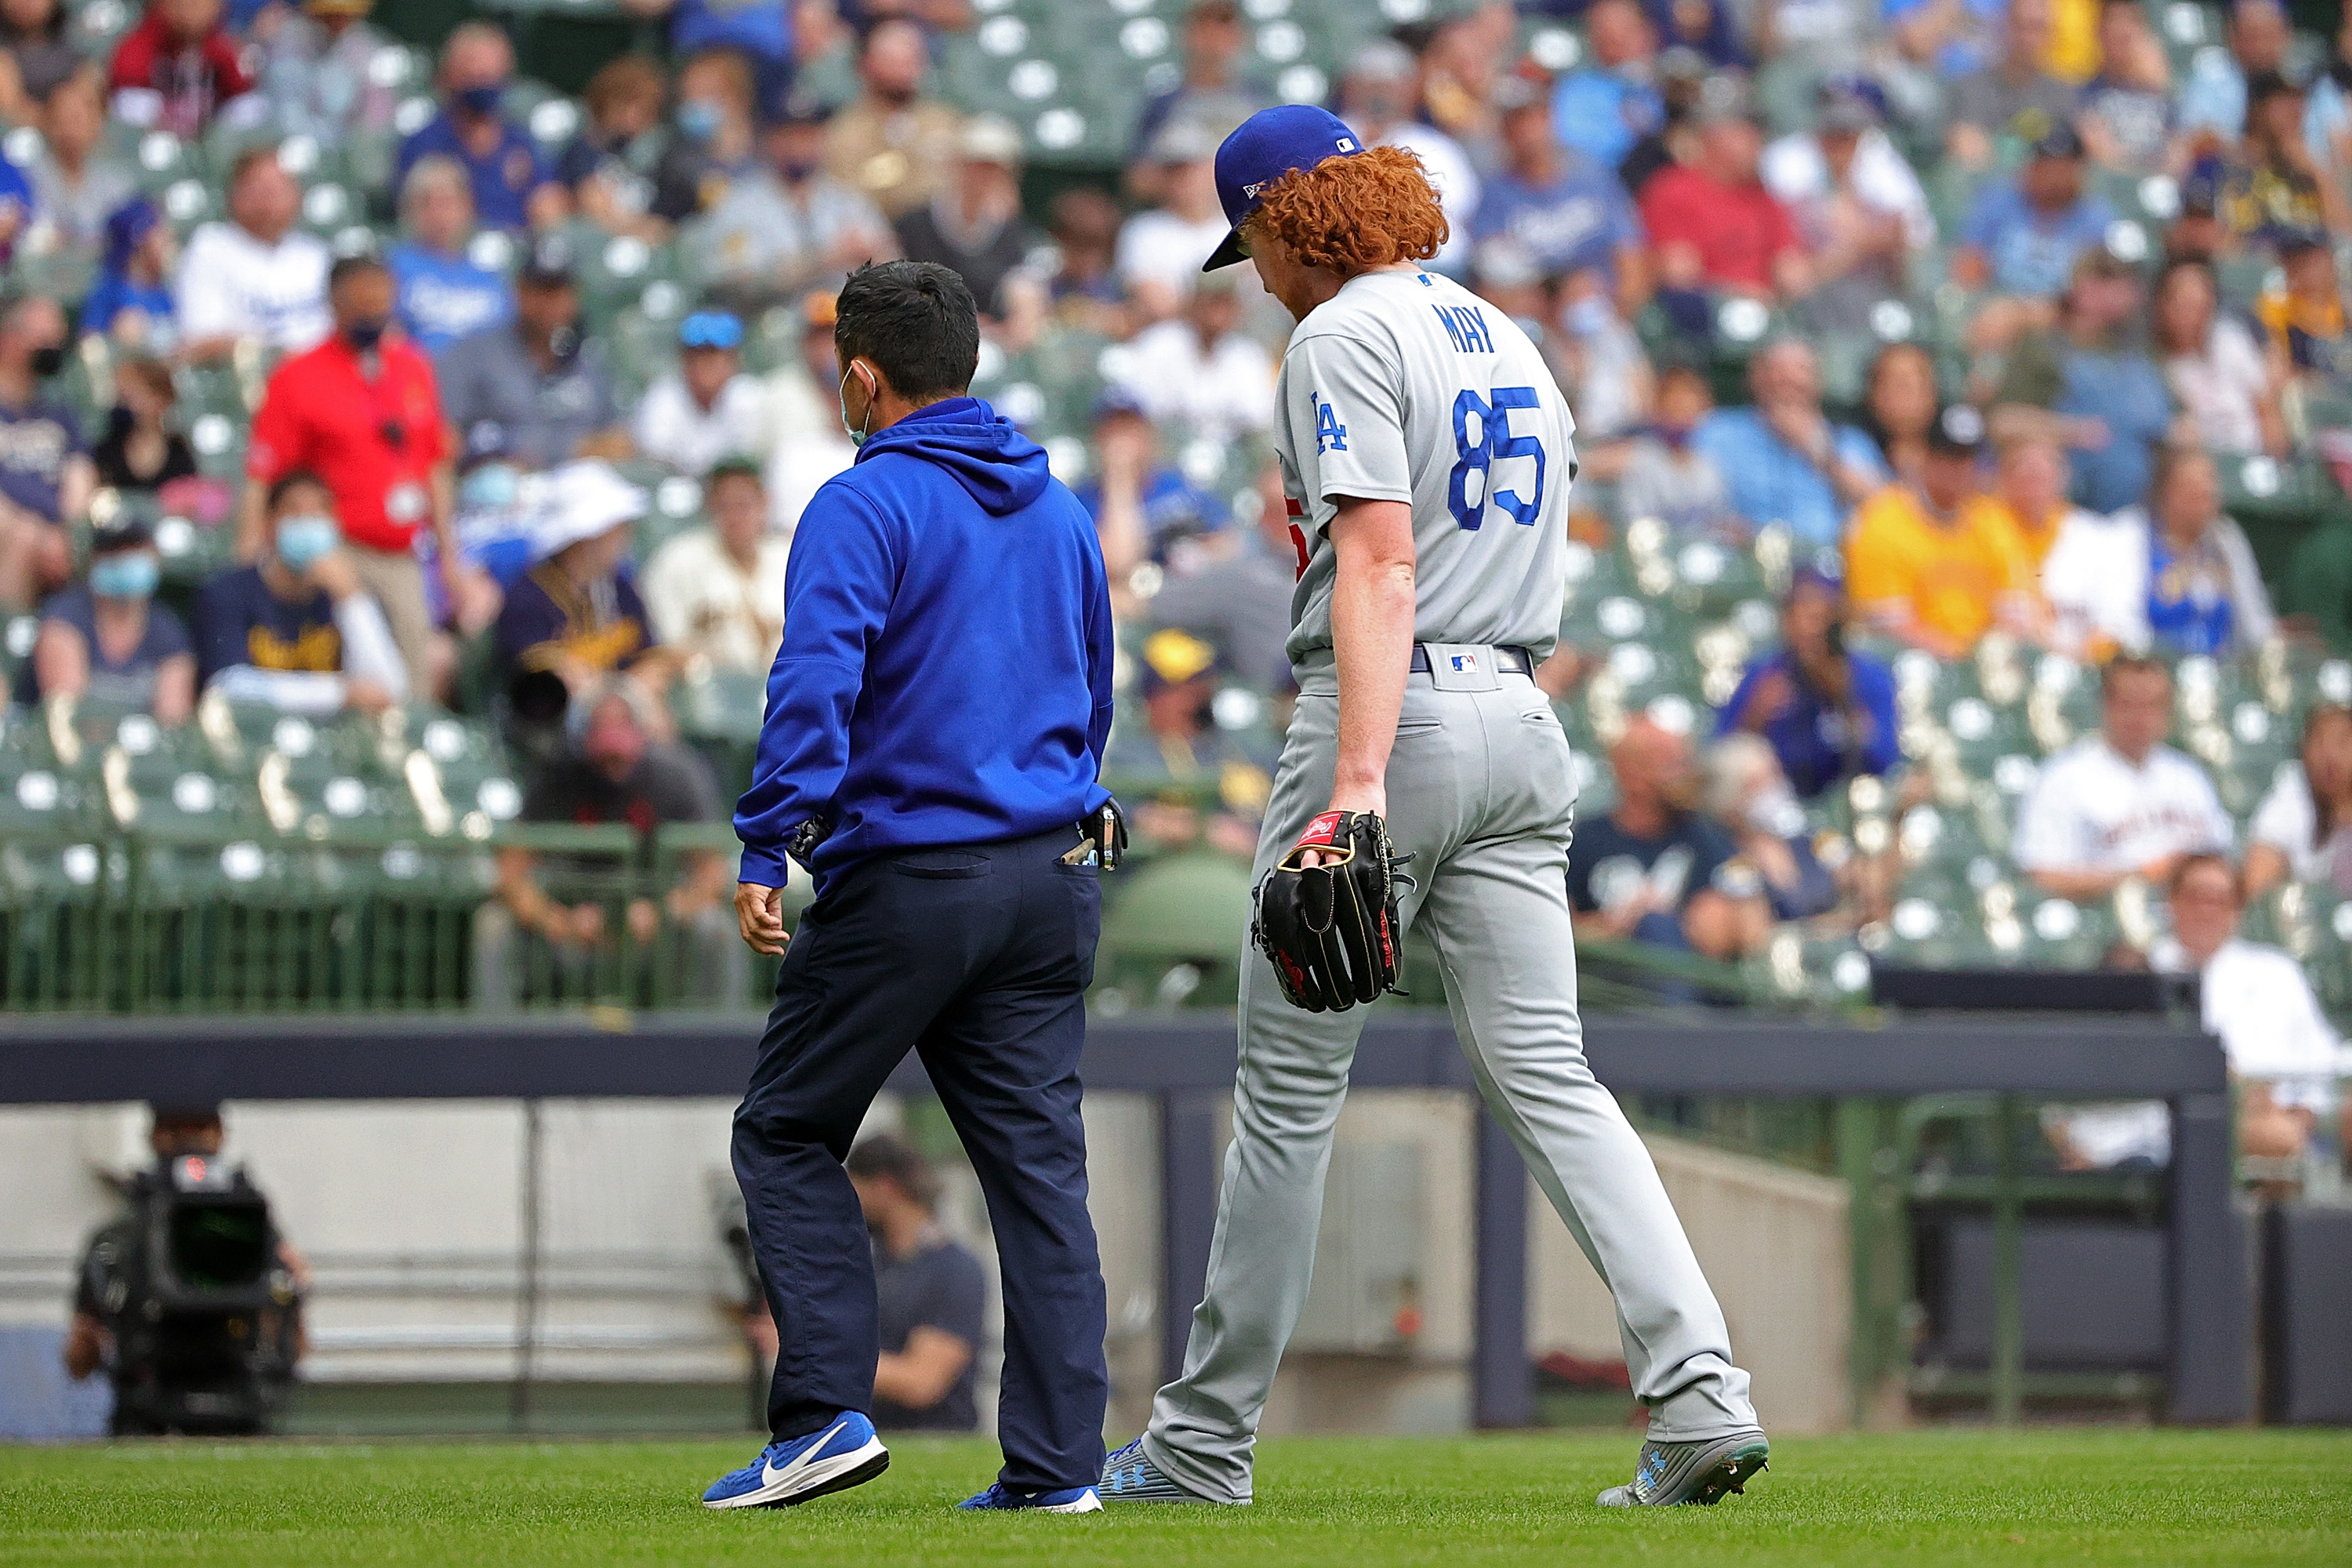 Dodgers Pitcher Dustin May to Undergo Season-Ending Tommy John